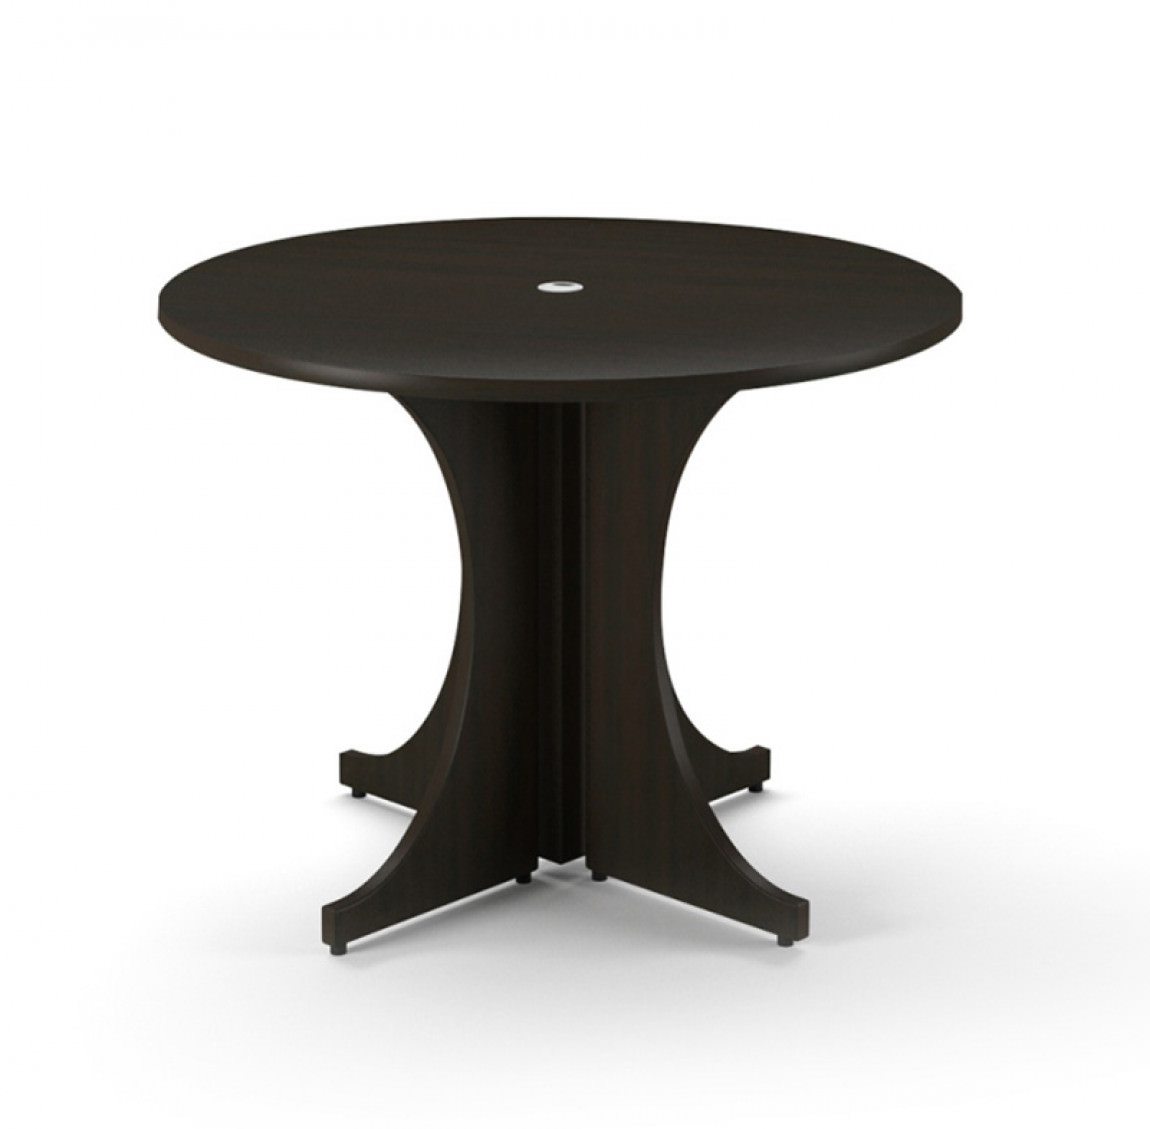 36" Round Conference Table